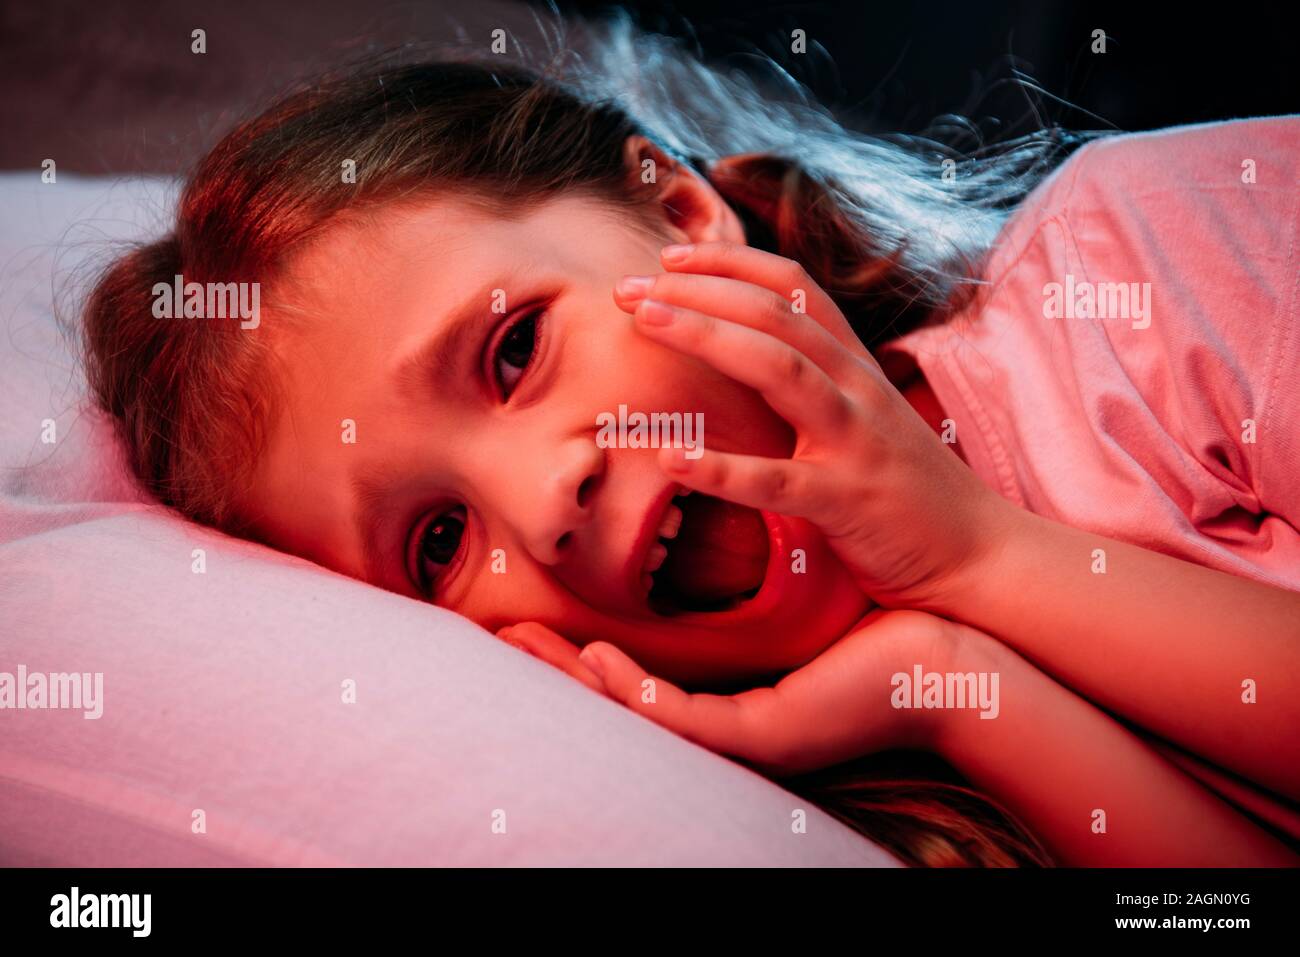 frightened child screaming and looking at camera while lying in dark bedroom Stock Photo